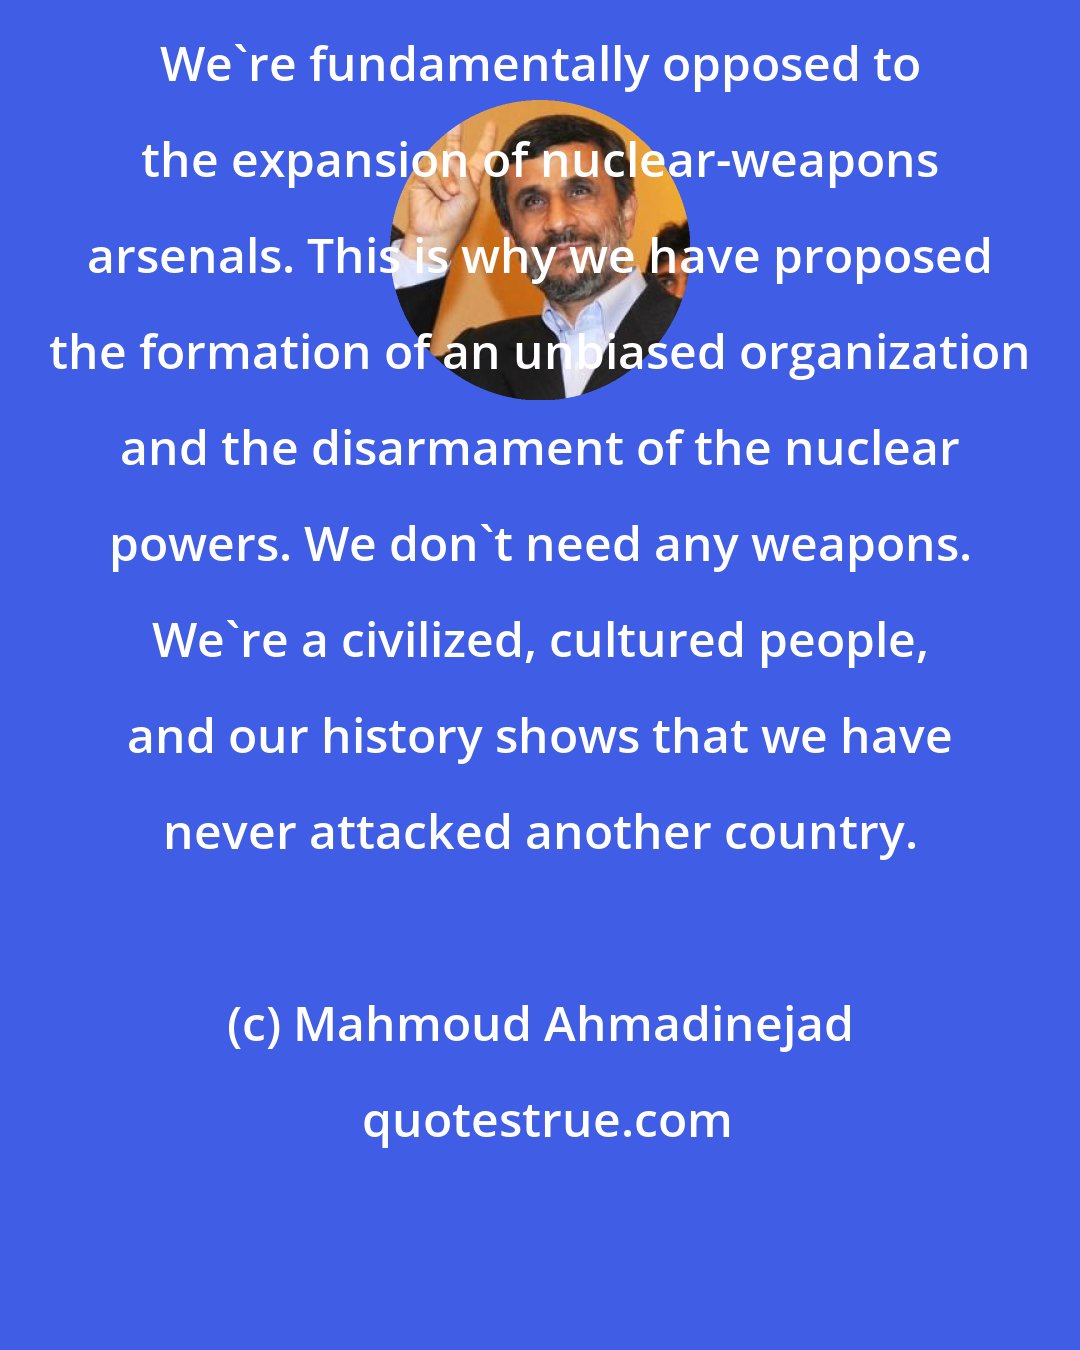 Mahmoud Ahmadinejad: We're fundamentally opposed to the expansion of nuclear-weapons arsenals. This is why we have proposed the formation of an unbiased organization and the disarmament of the nuclear powers. We don't need any weapons. We're a civilized, cultured people, and our history shows that we have never attacked another country.